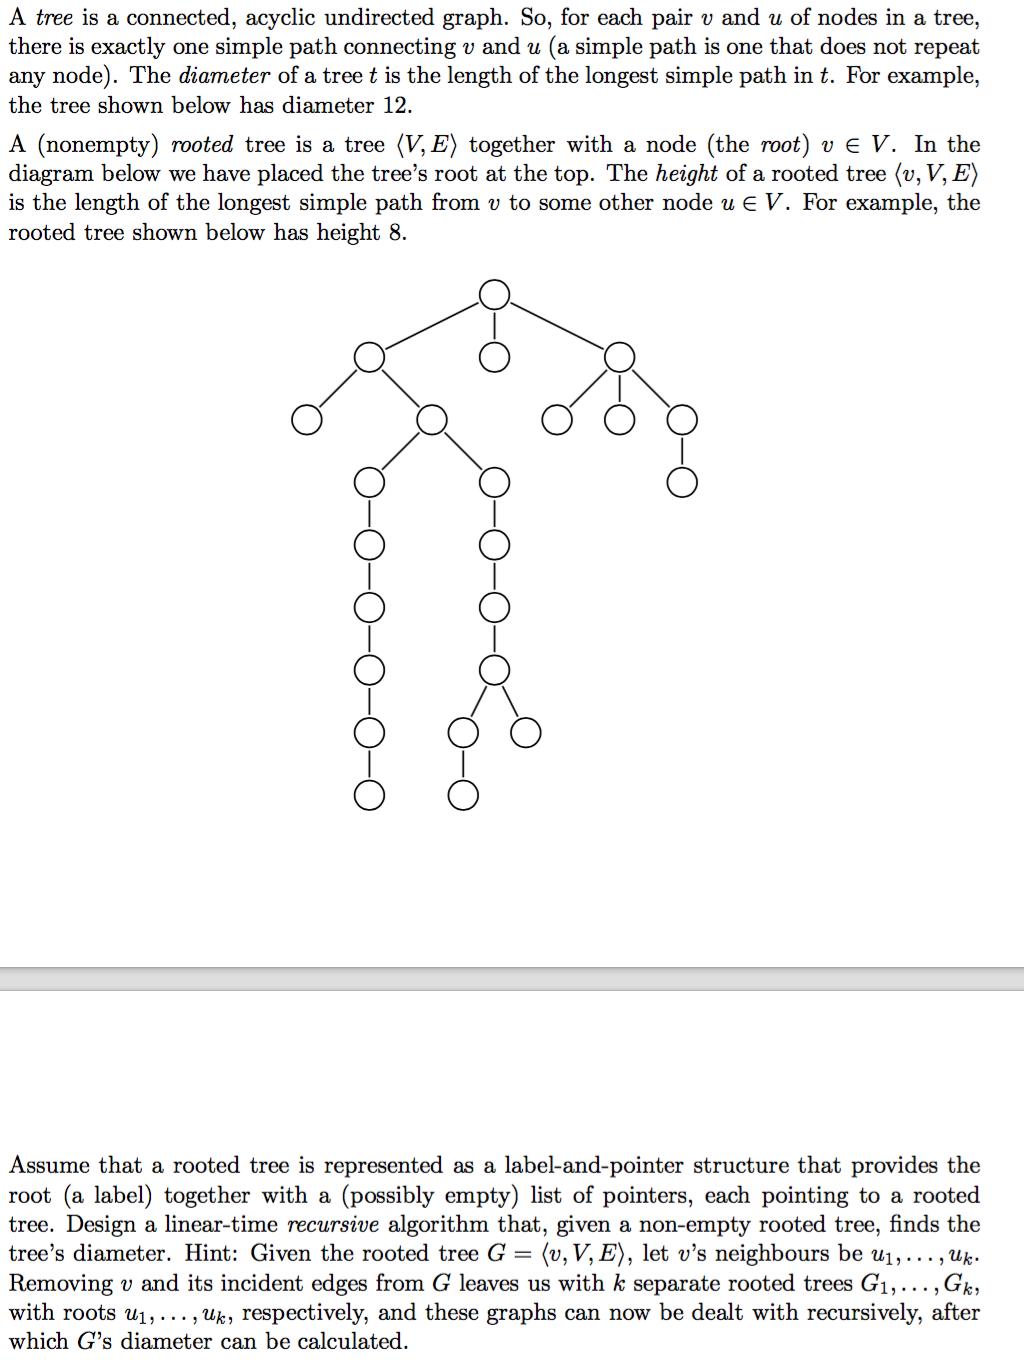 A tree is a connected, acyclic undirected graph. So, for each pair v and u of nodes in a tree, there is